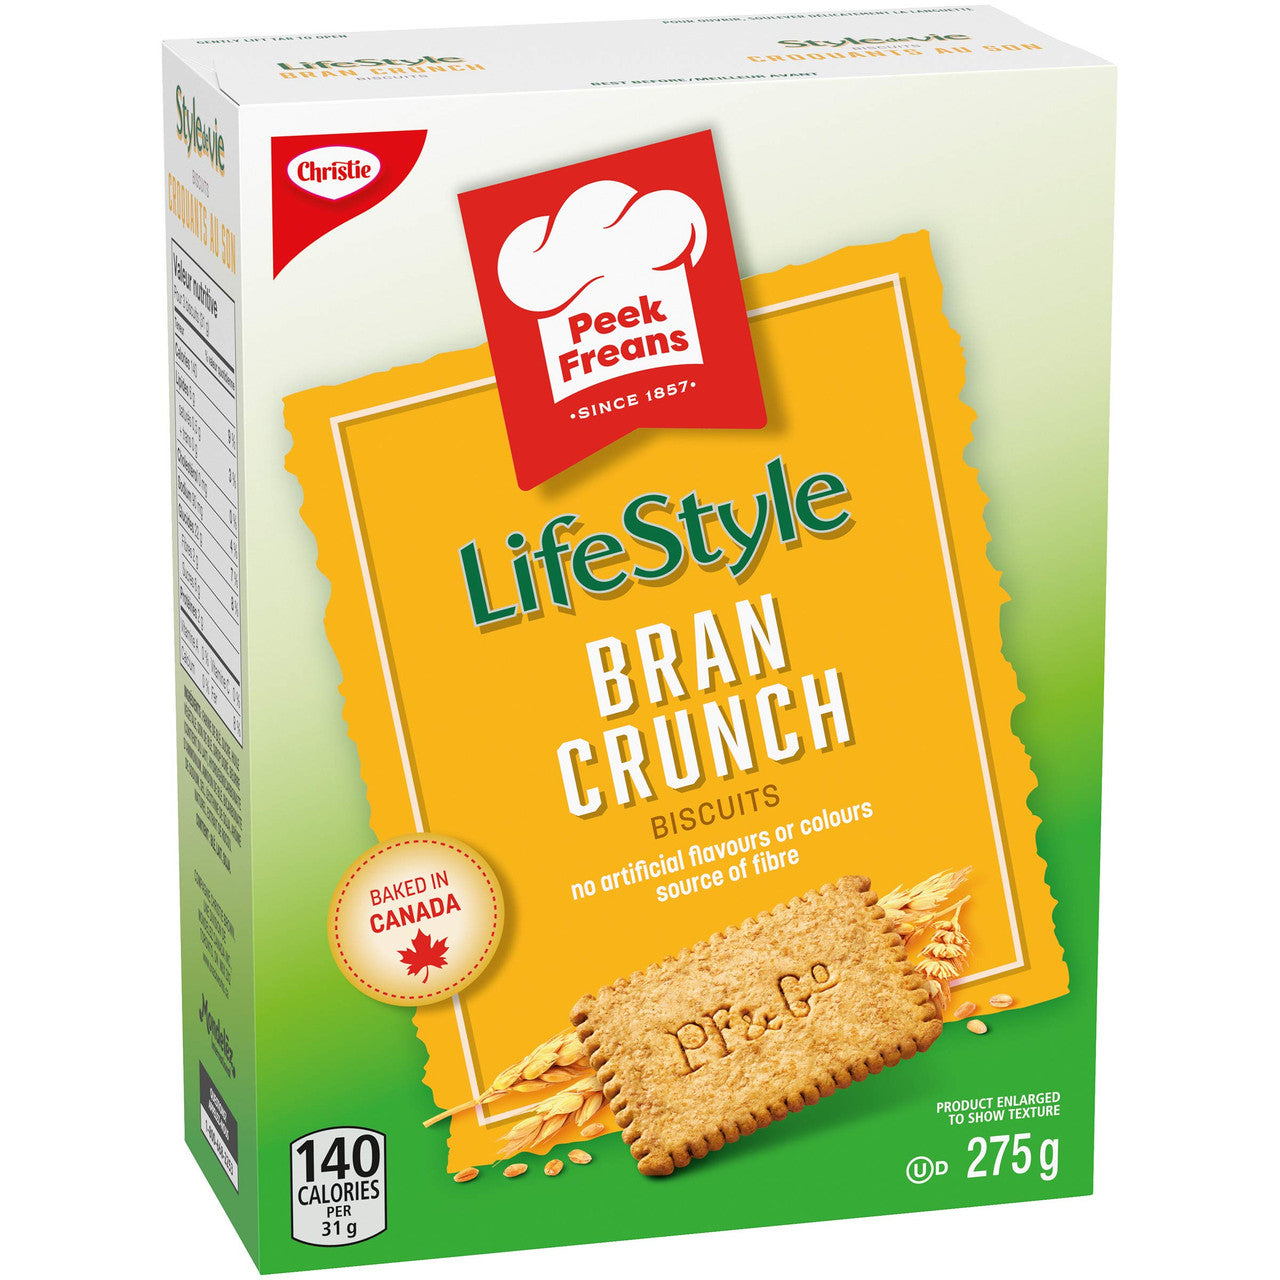 Christie Peek Freans Lifestyle Bran Crunch Cookies, 275g/9.7oz., {Imported from Canada}